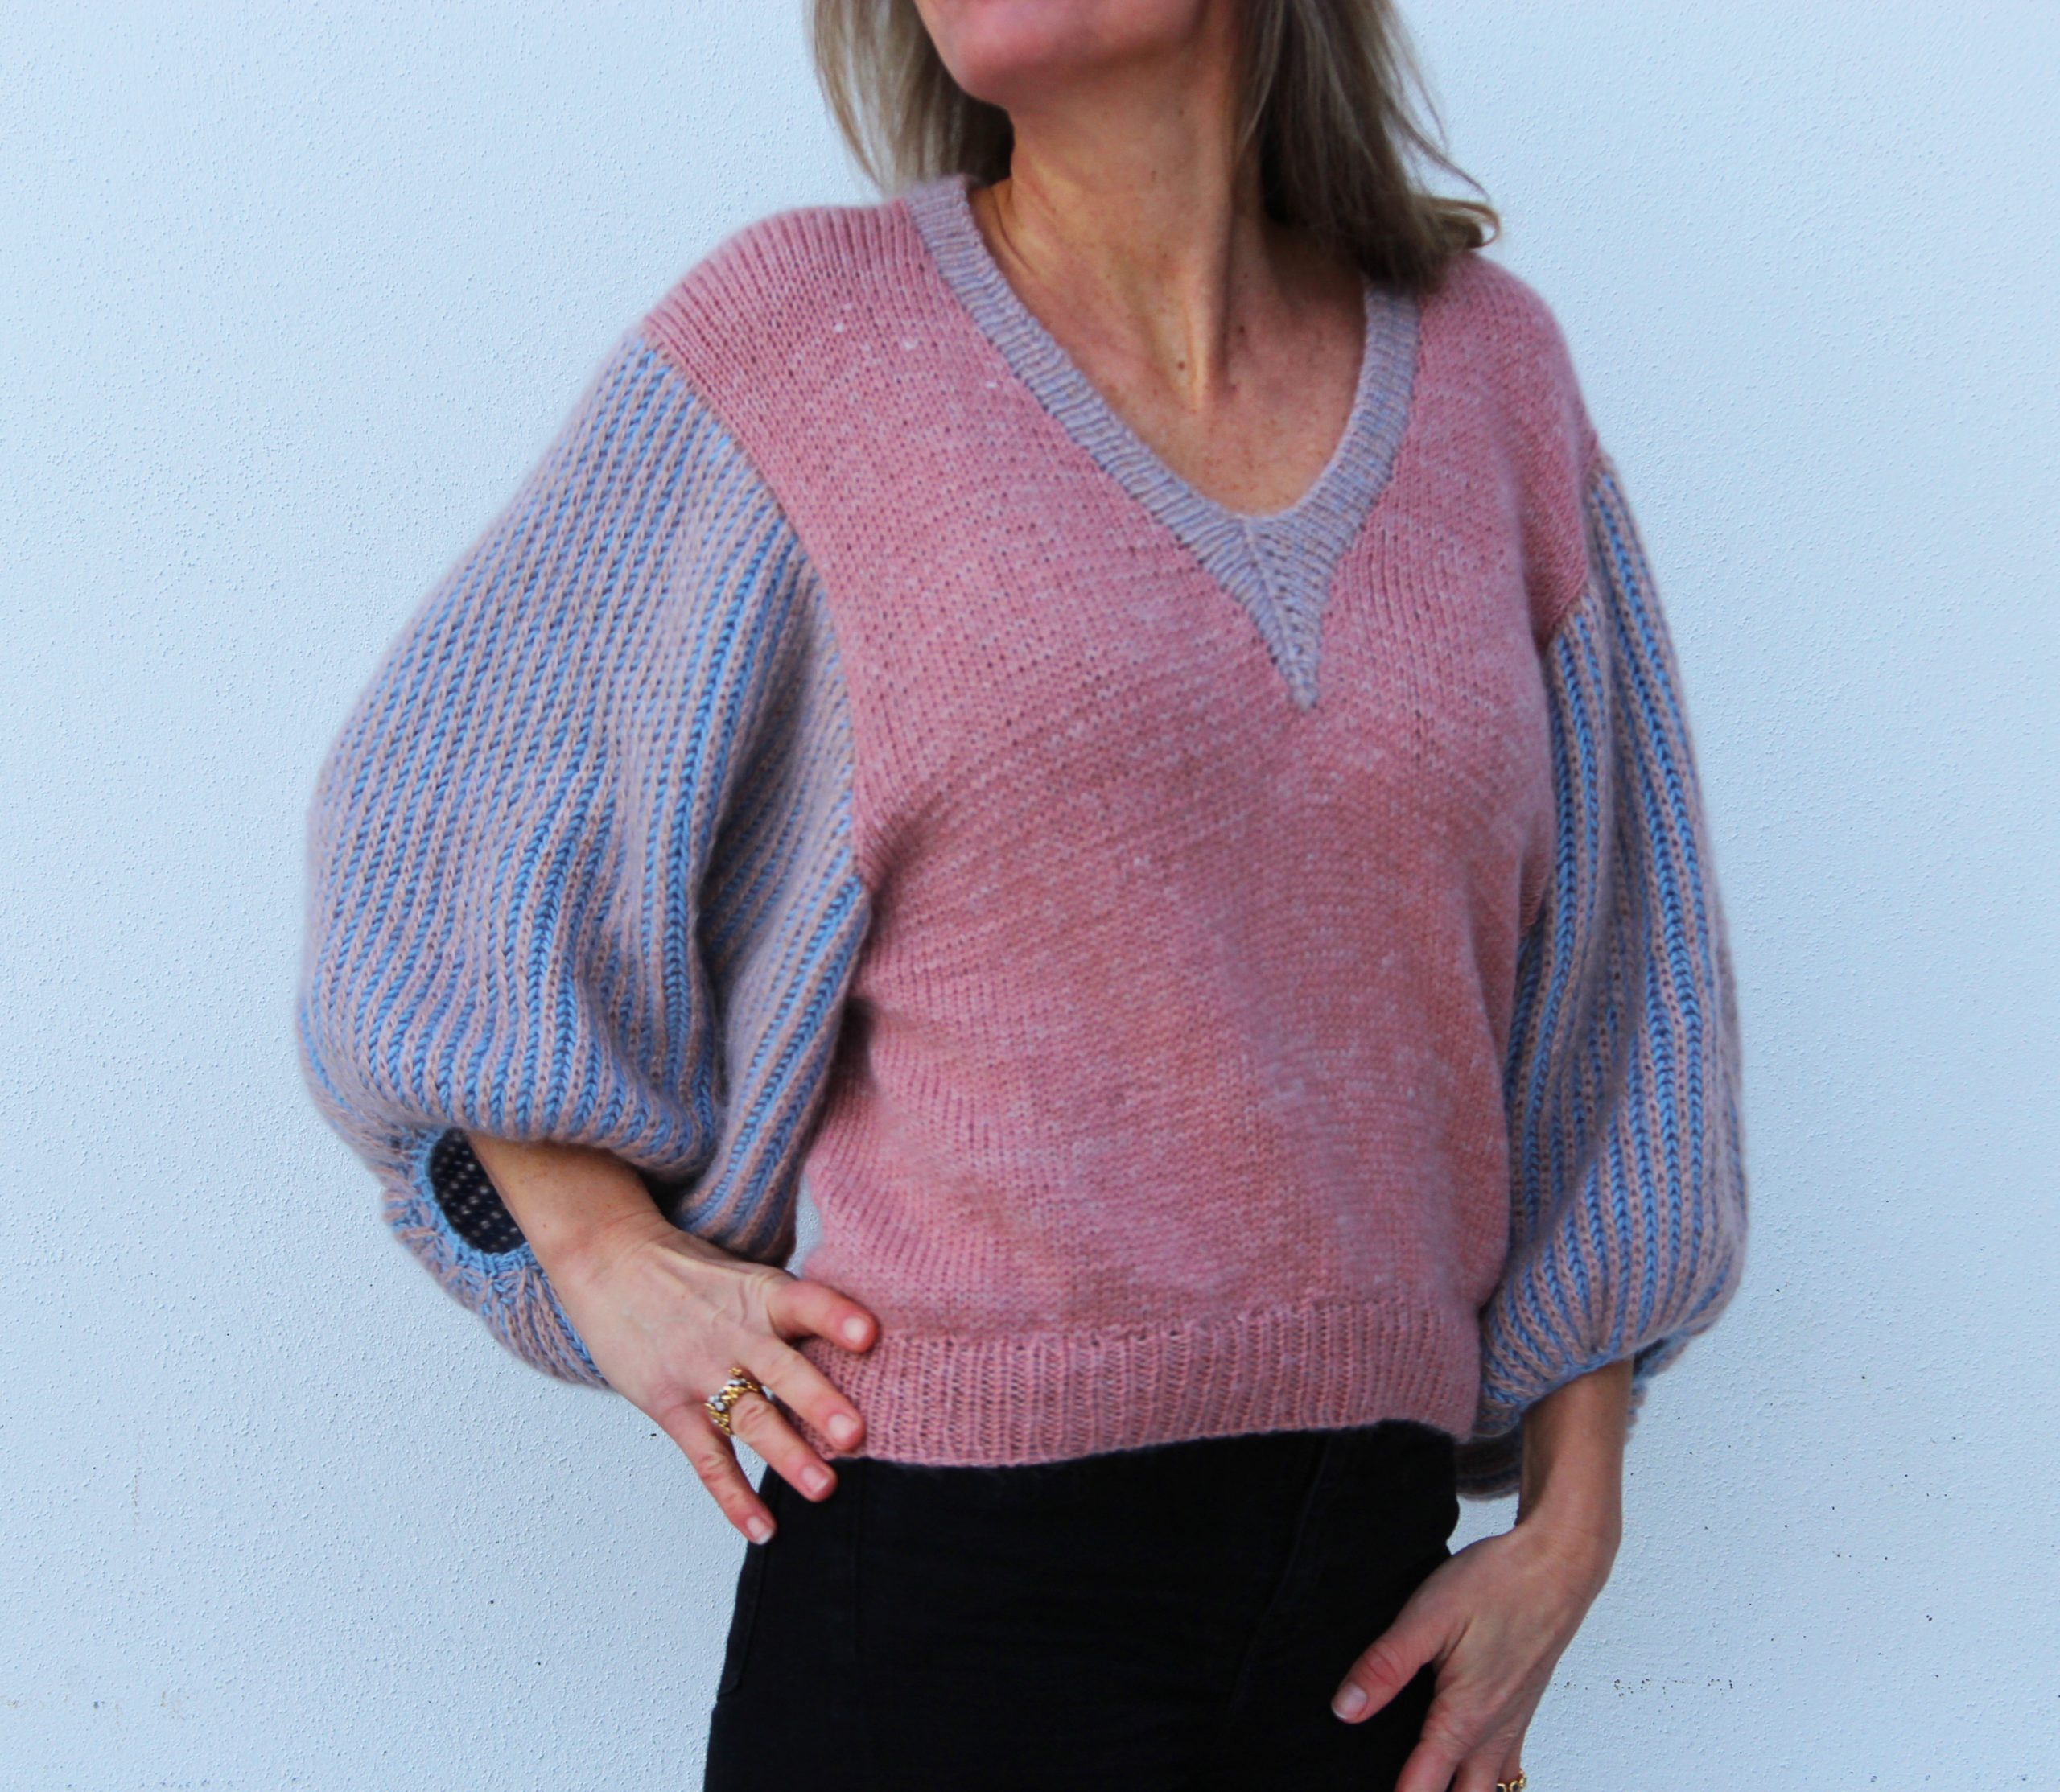 VesterbyCrea.No.13 sweater with large sleeves worked in two colour brioche